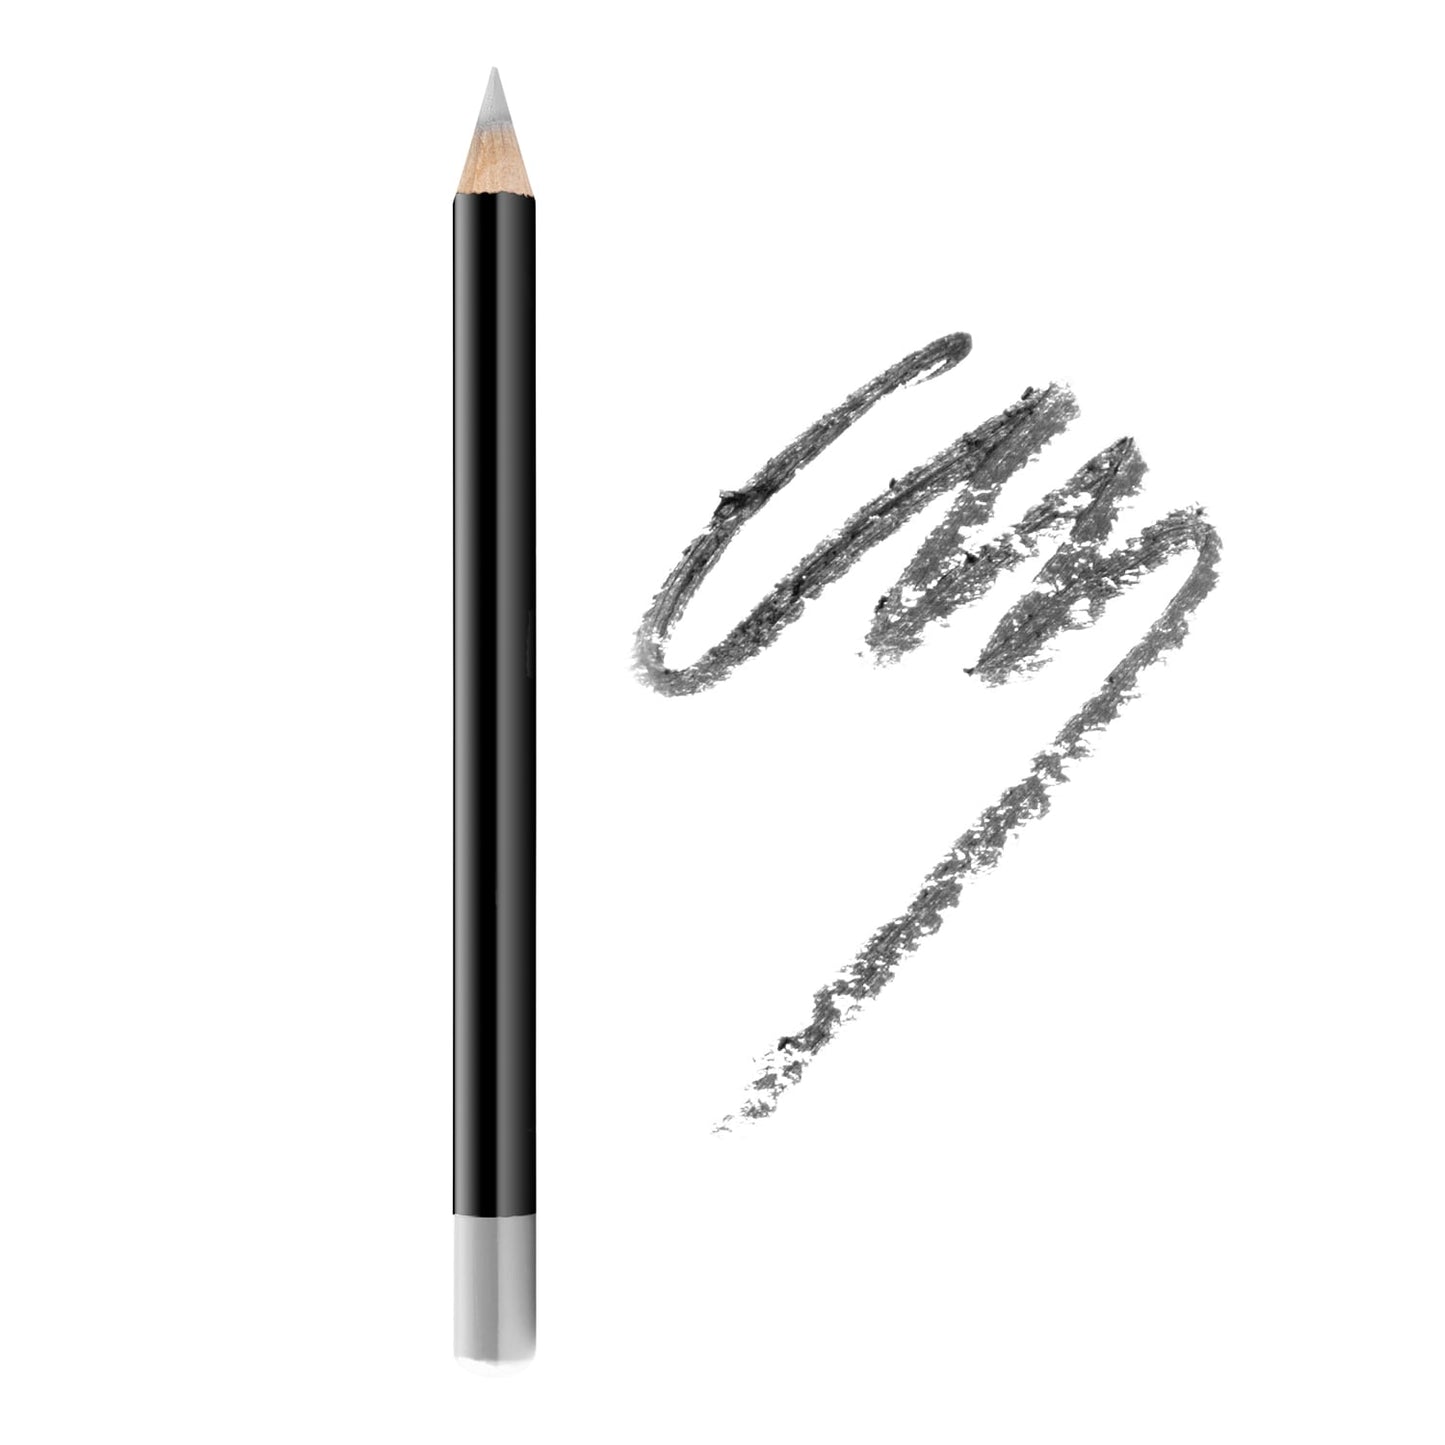 Eyeliner Pencil - M&H FashionEyeliner Pencileye-pencilM&H FashionM&H FashionEye-Pencil-1White Eye Pencil (01)Eyeliner PencilM&H Fashioneye-pencilM&H Fashion These cushiony, creamy eyeliner pencil deliver powerful, vibrant color that slides on smoothly. The soft texture glides on effortlessly because of the high-quality Eyeliner Pencil